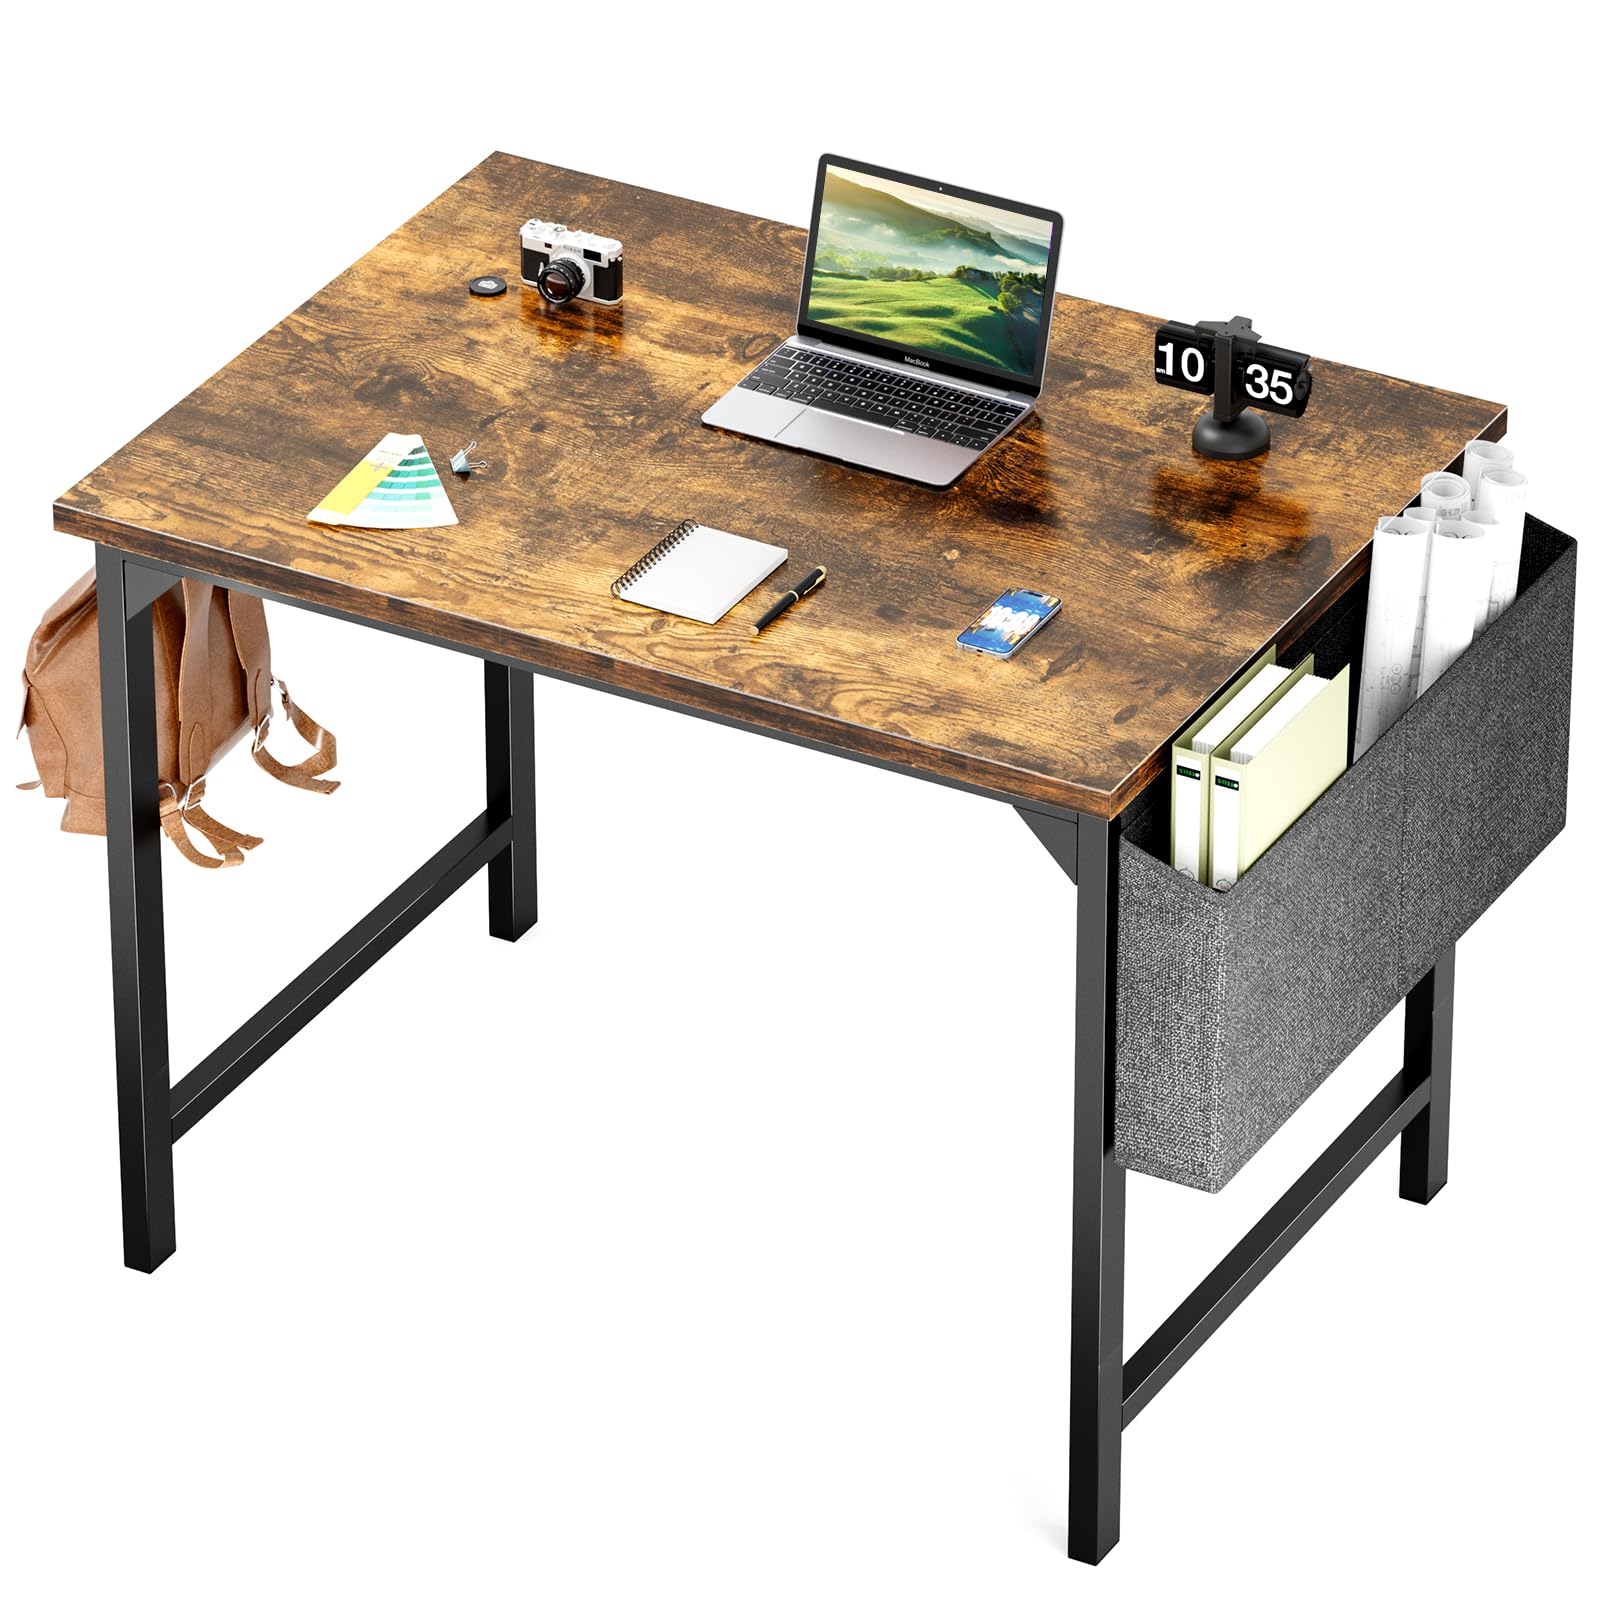 32" Sweetcrispy Wooden Office Desk w/ Storage Bag (Rustic Brown) $27 + Free Shipping w/ Prime or on $35+